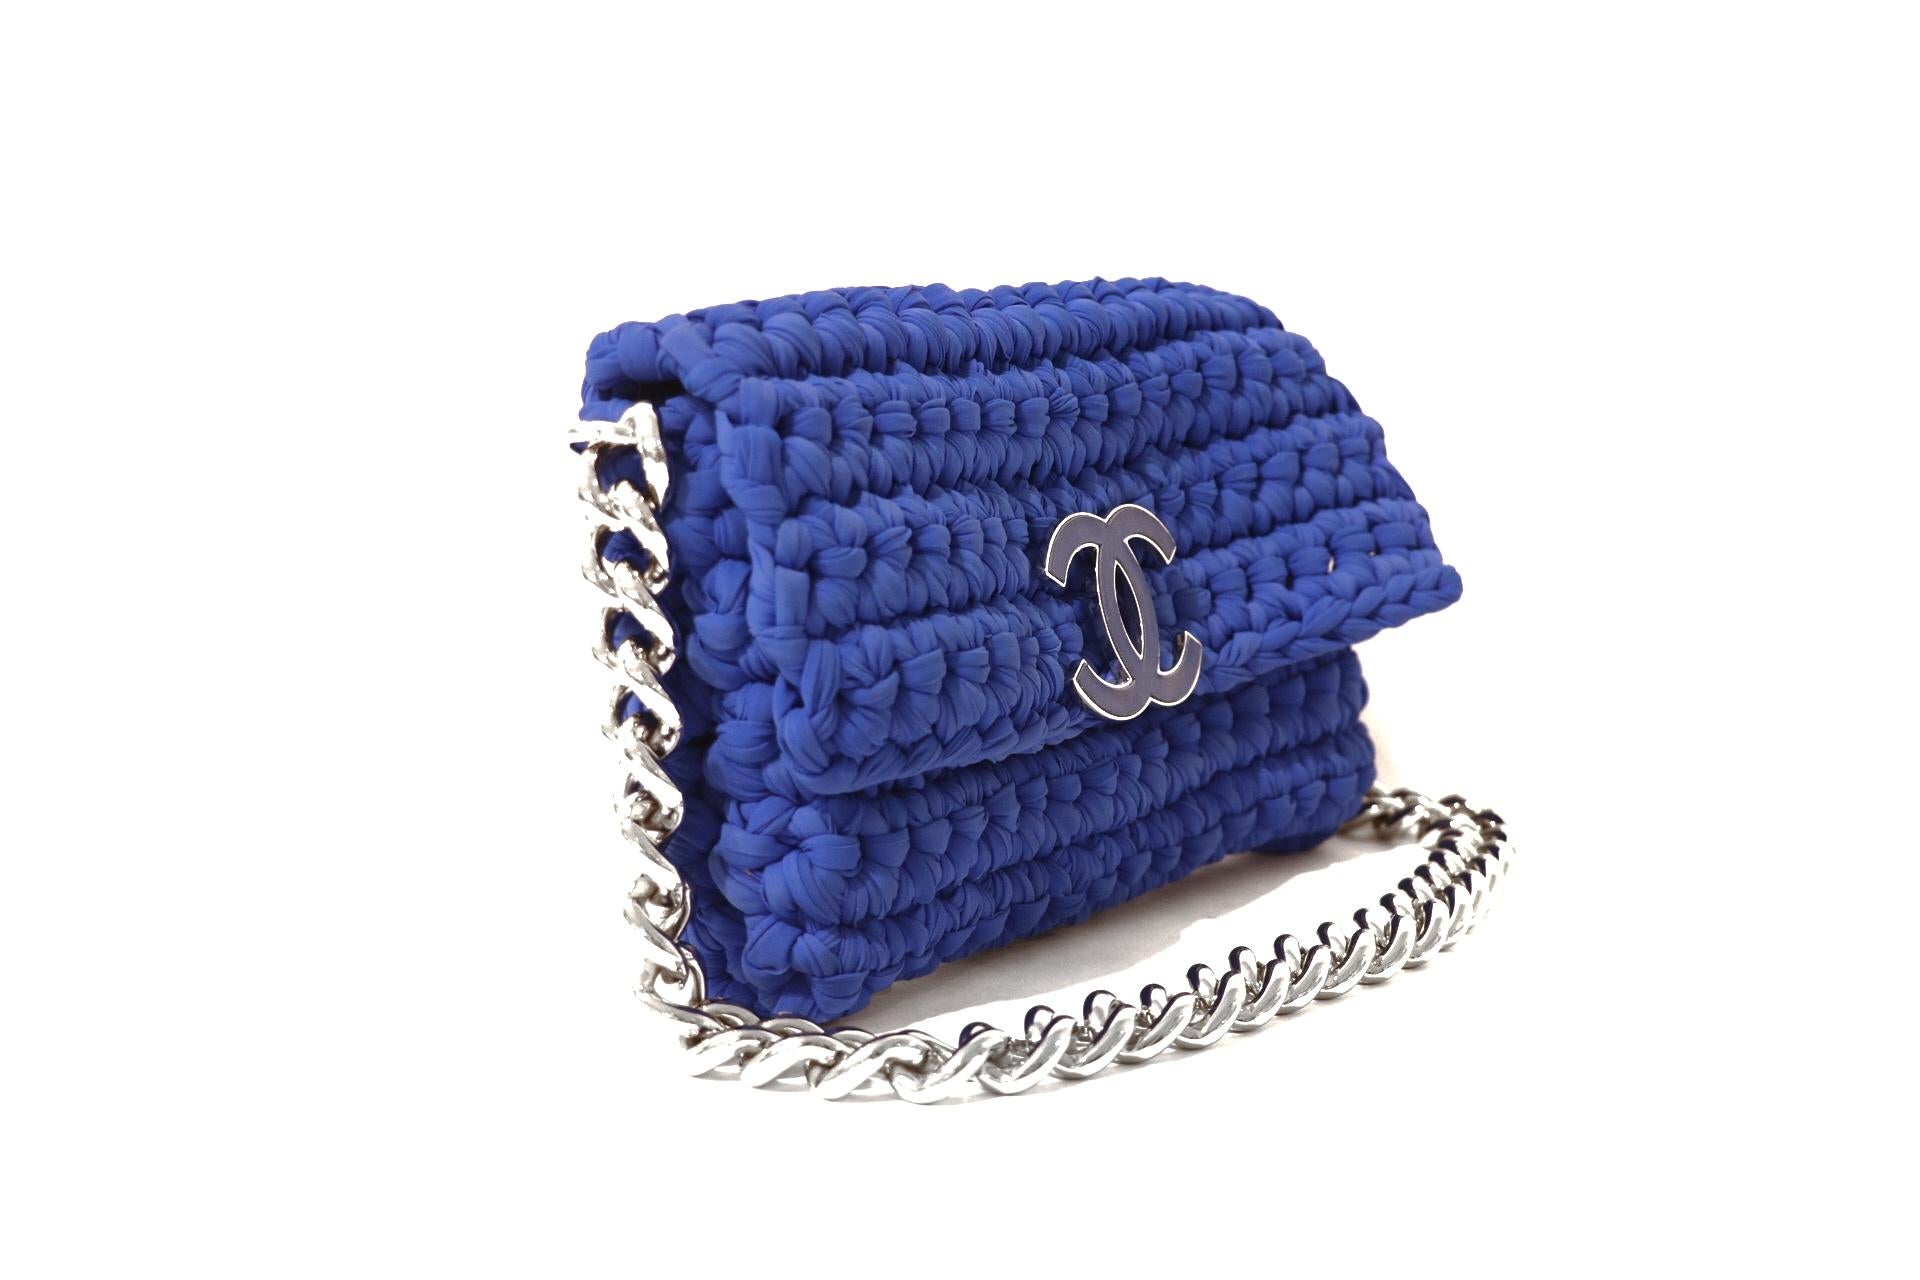 This authentic Chanel Blue Fancy Crochet Flap Bag is in excellent condition.  From the Cruise 2014 Collection, this uniquely textured piece adds a splash of color to any ensemble. 
Bright Cobalt Blue woven fabric bag has a leather interlocking CC